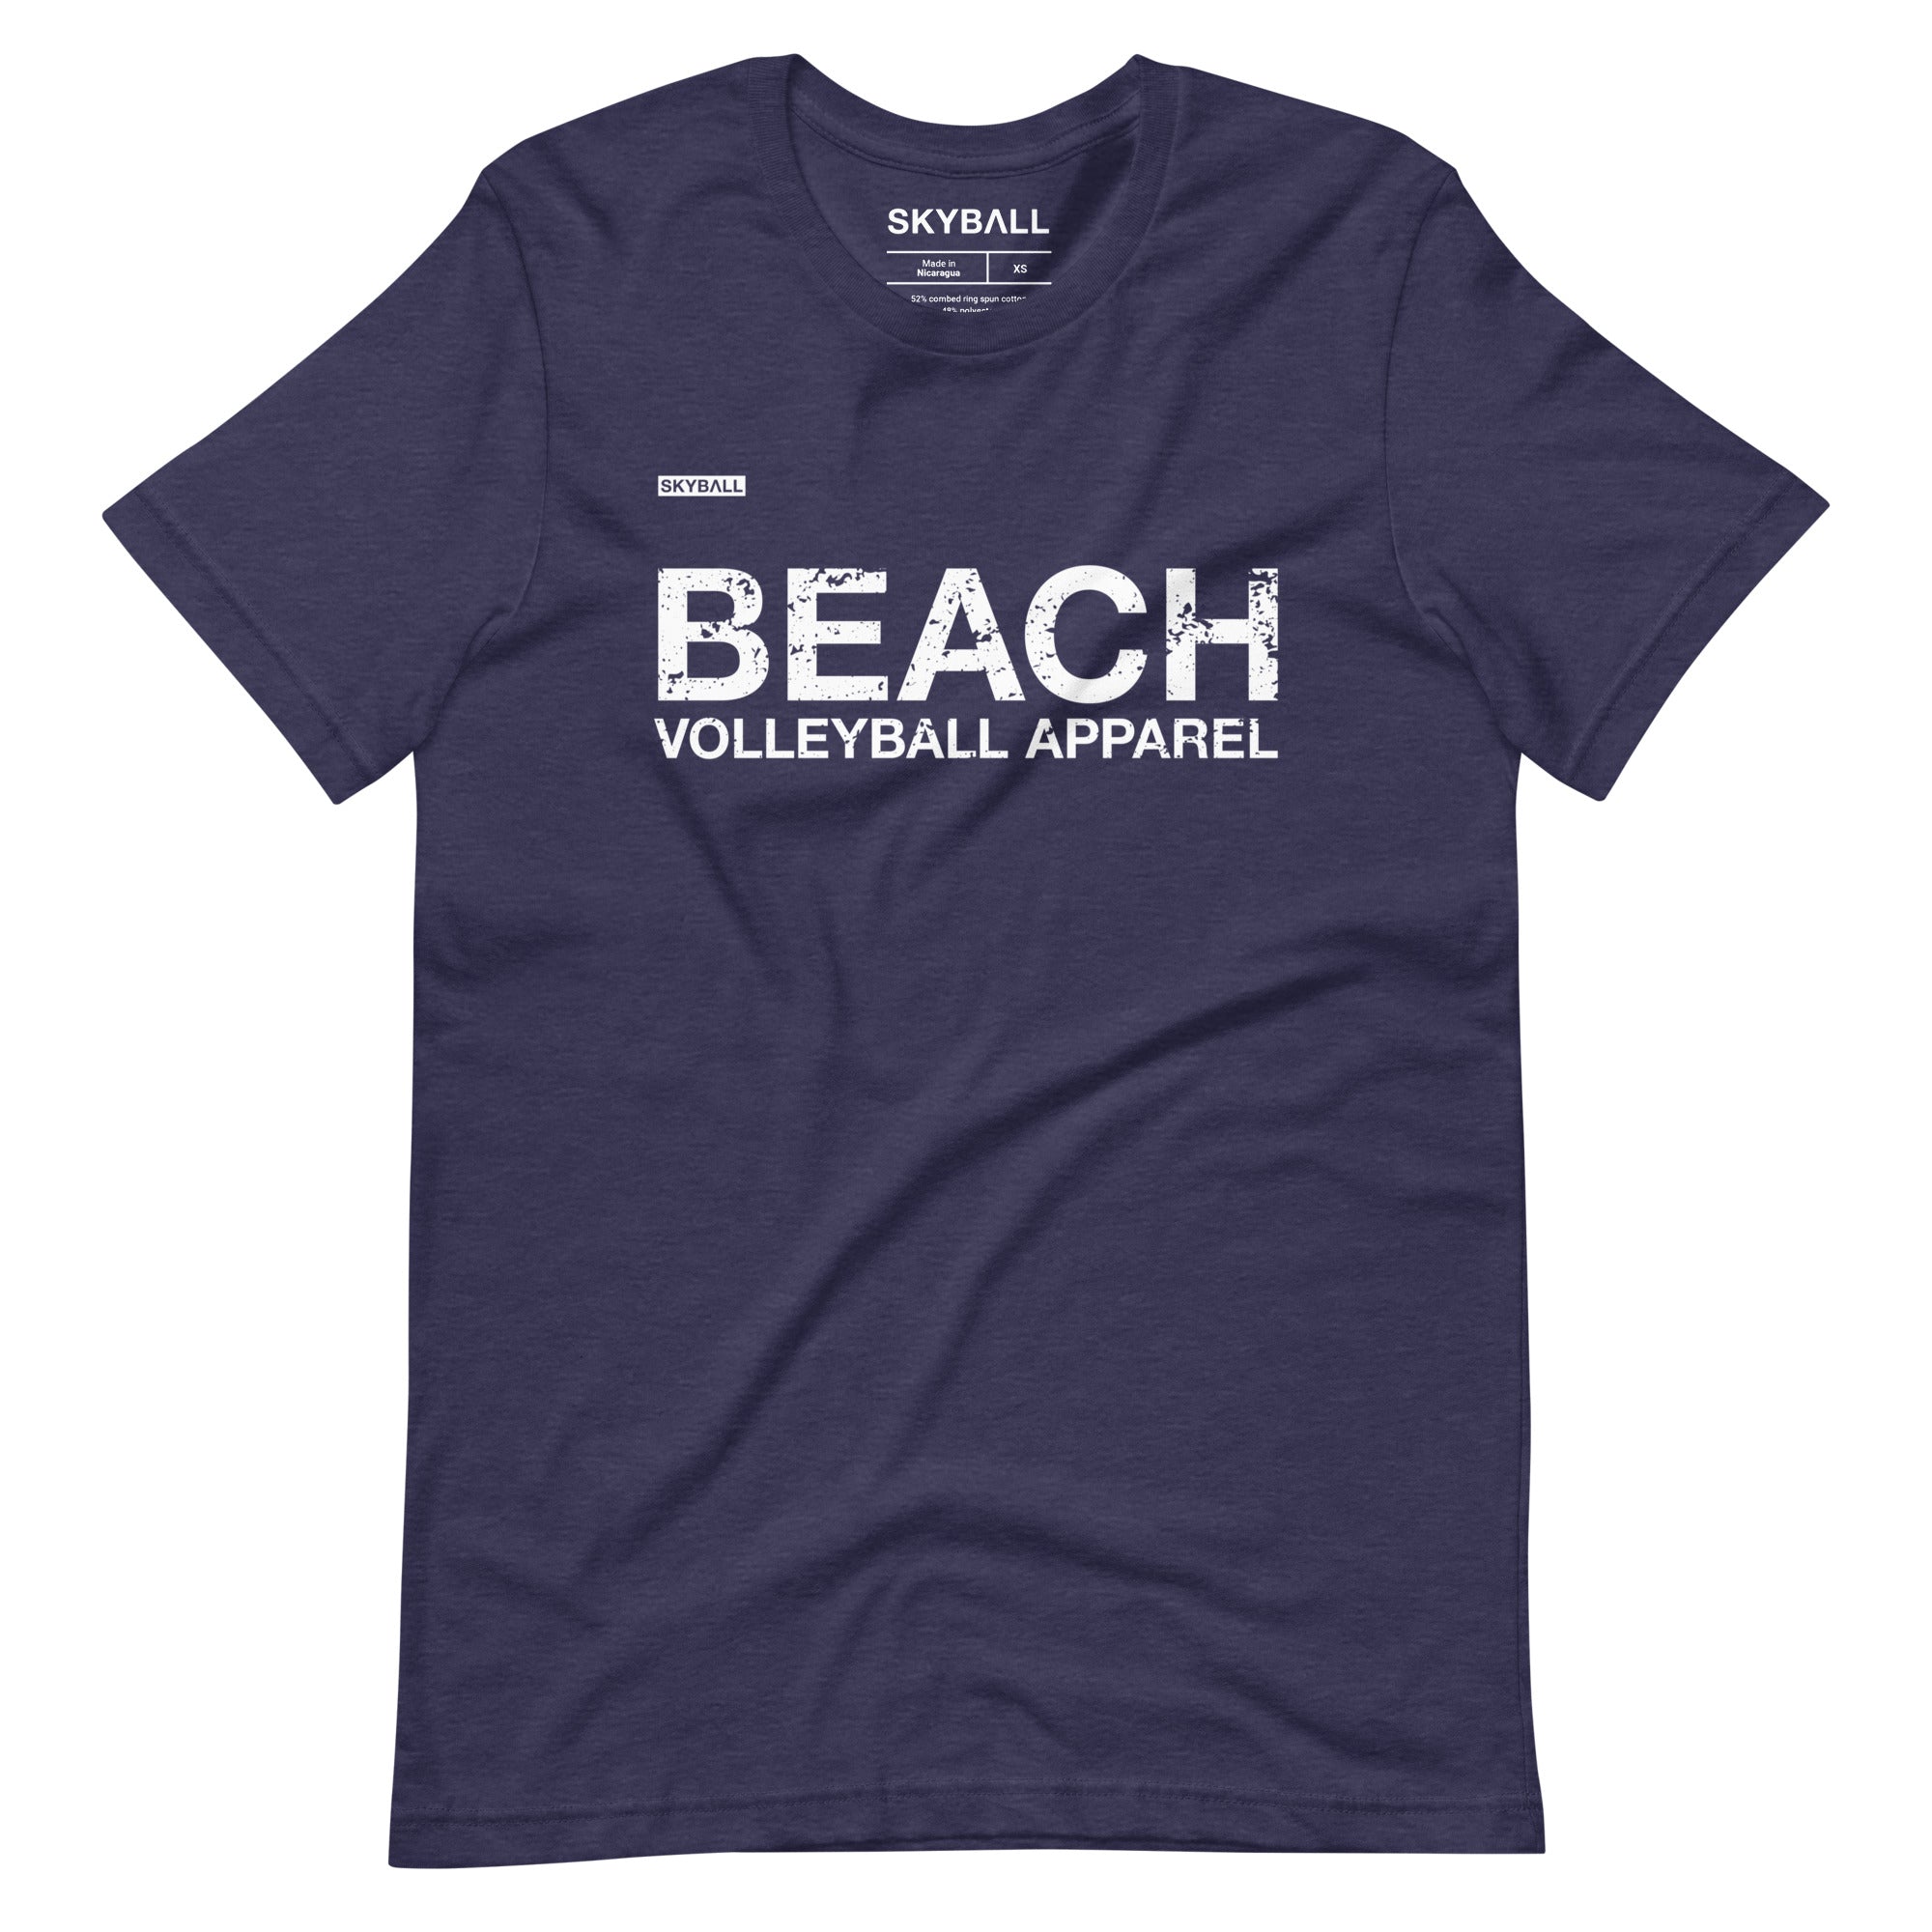 Skyball Beach Volleyball Apparel - Distressed T-Shirt